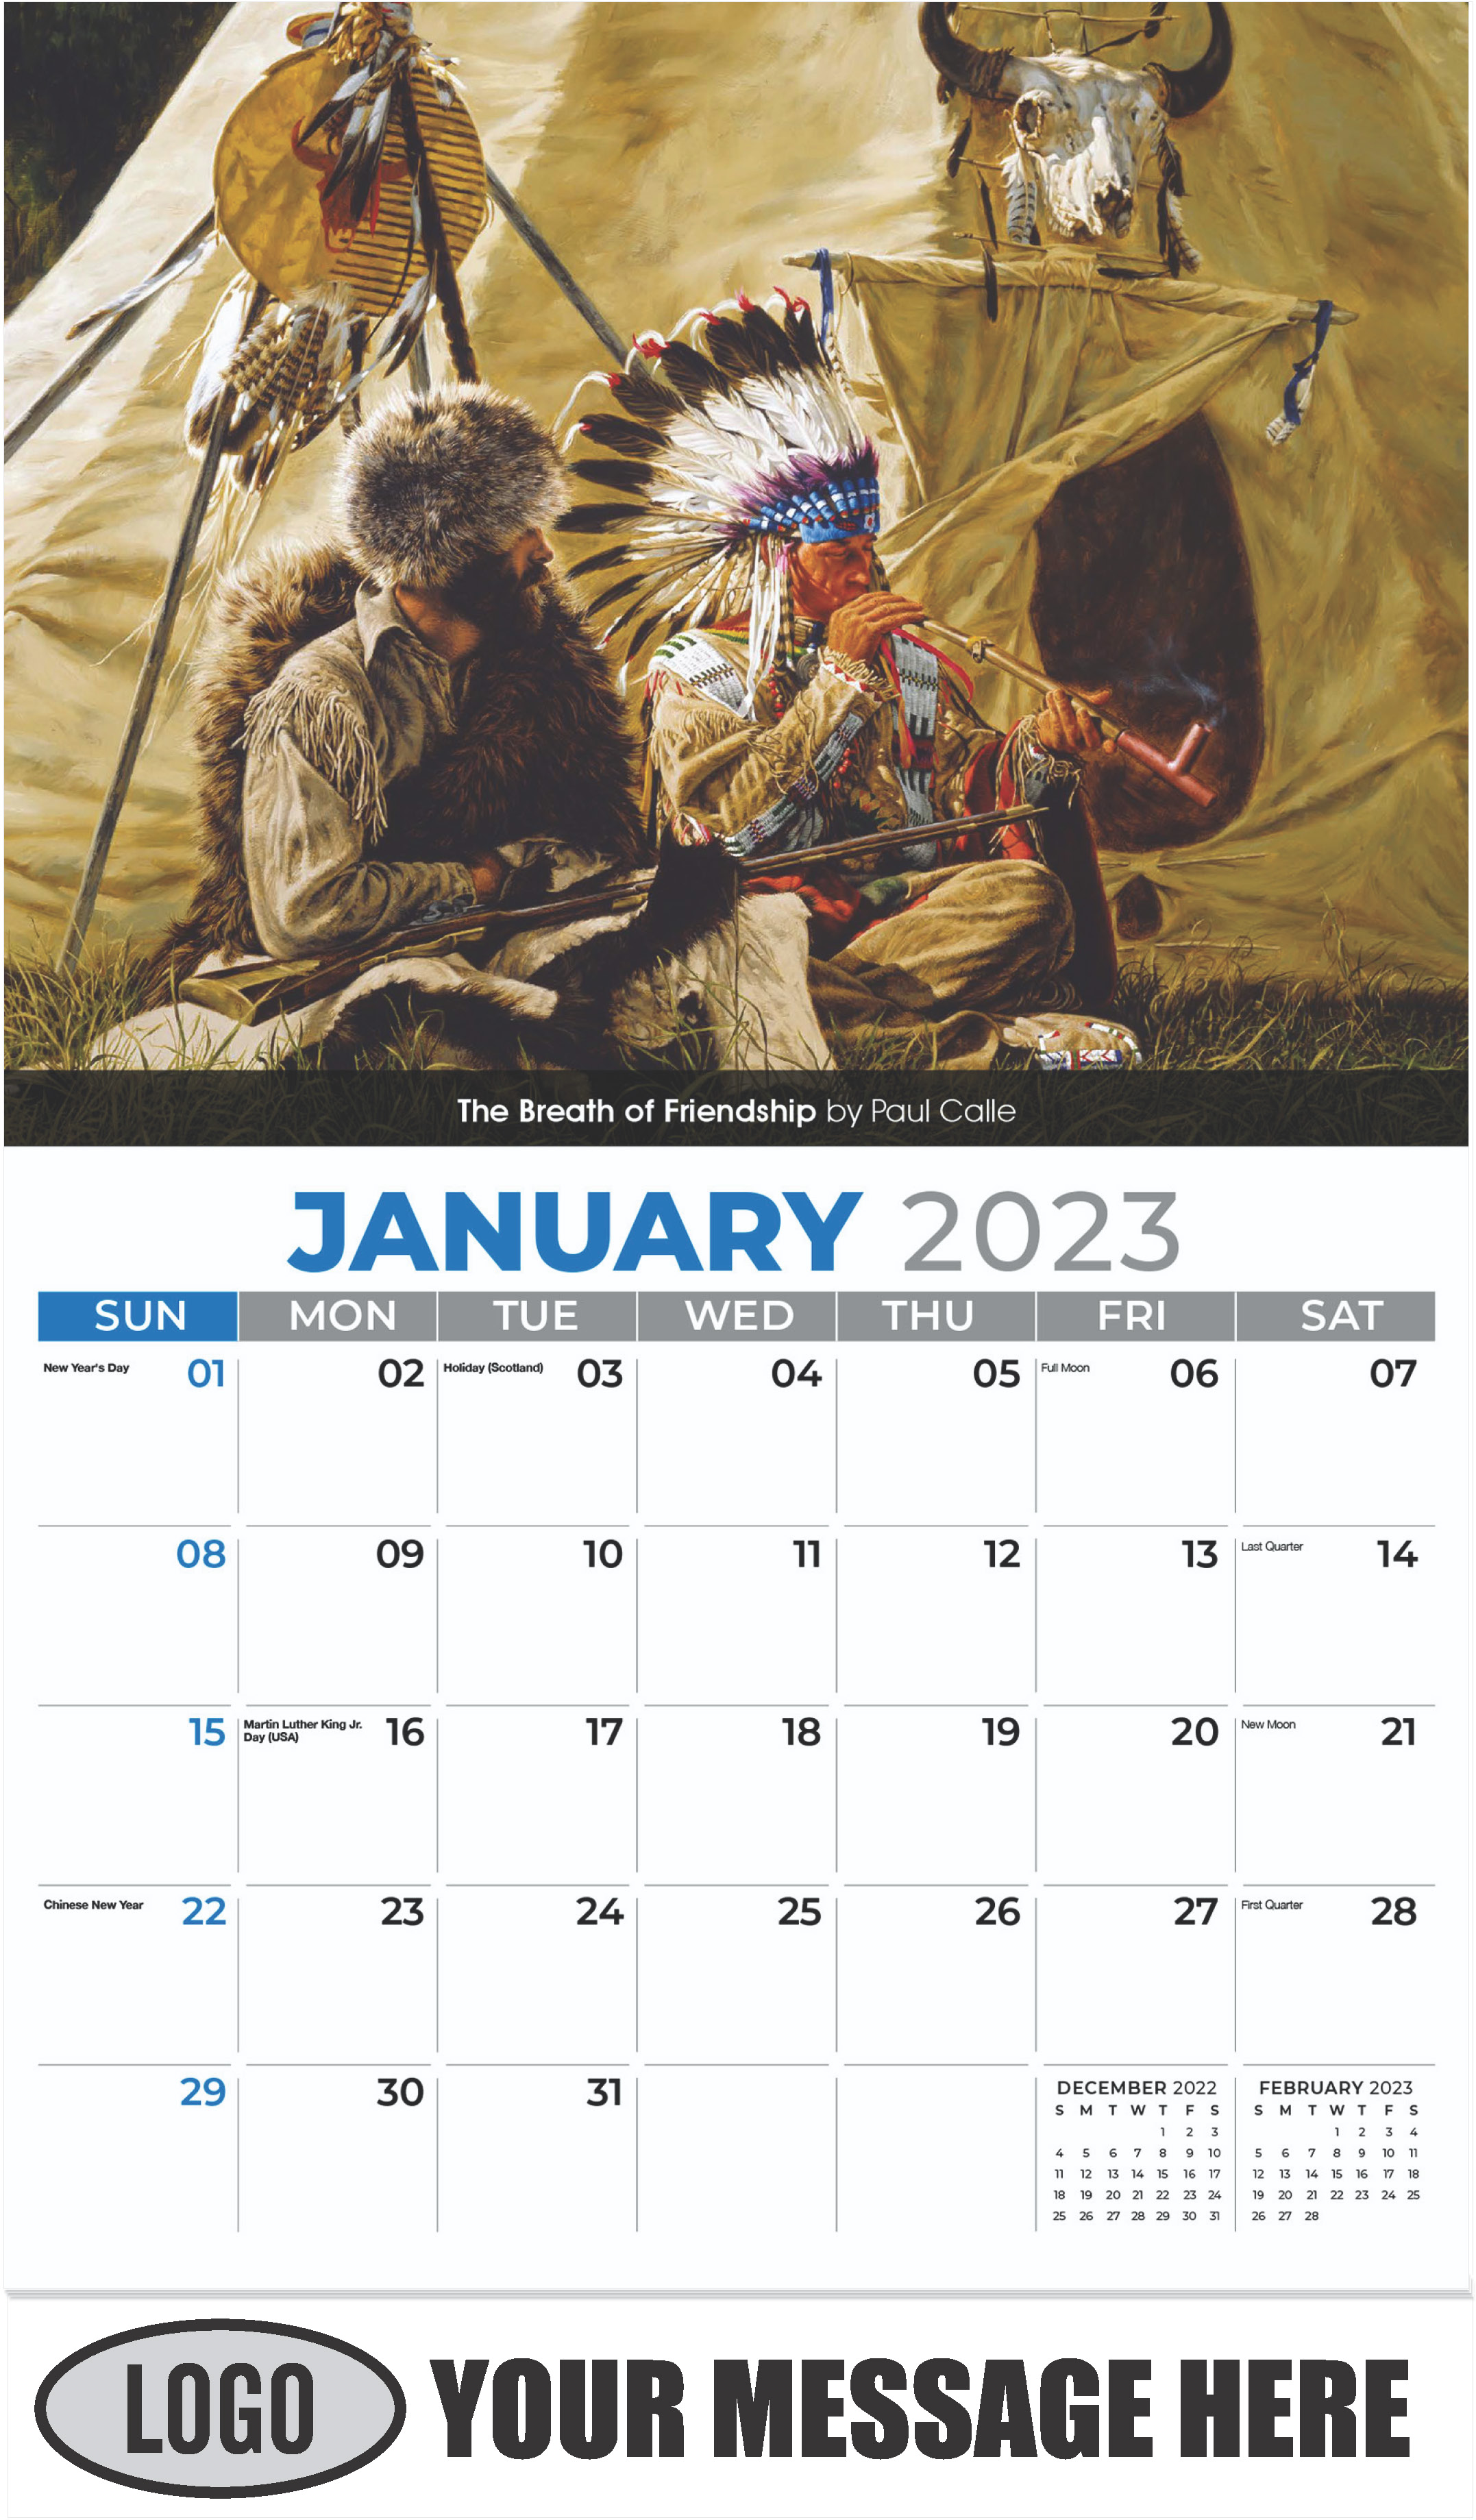 The Breath of Friendship by Paul Calle - January - Spirit of the West 2023 Promotional Calendar